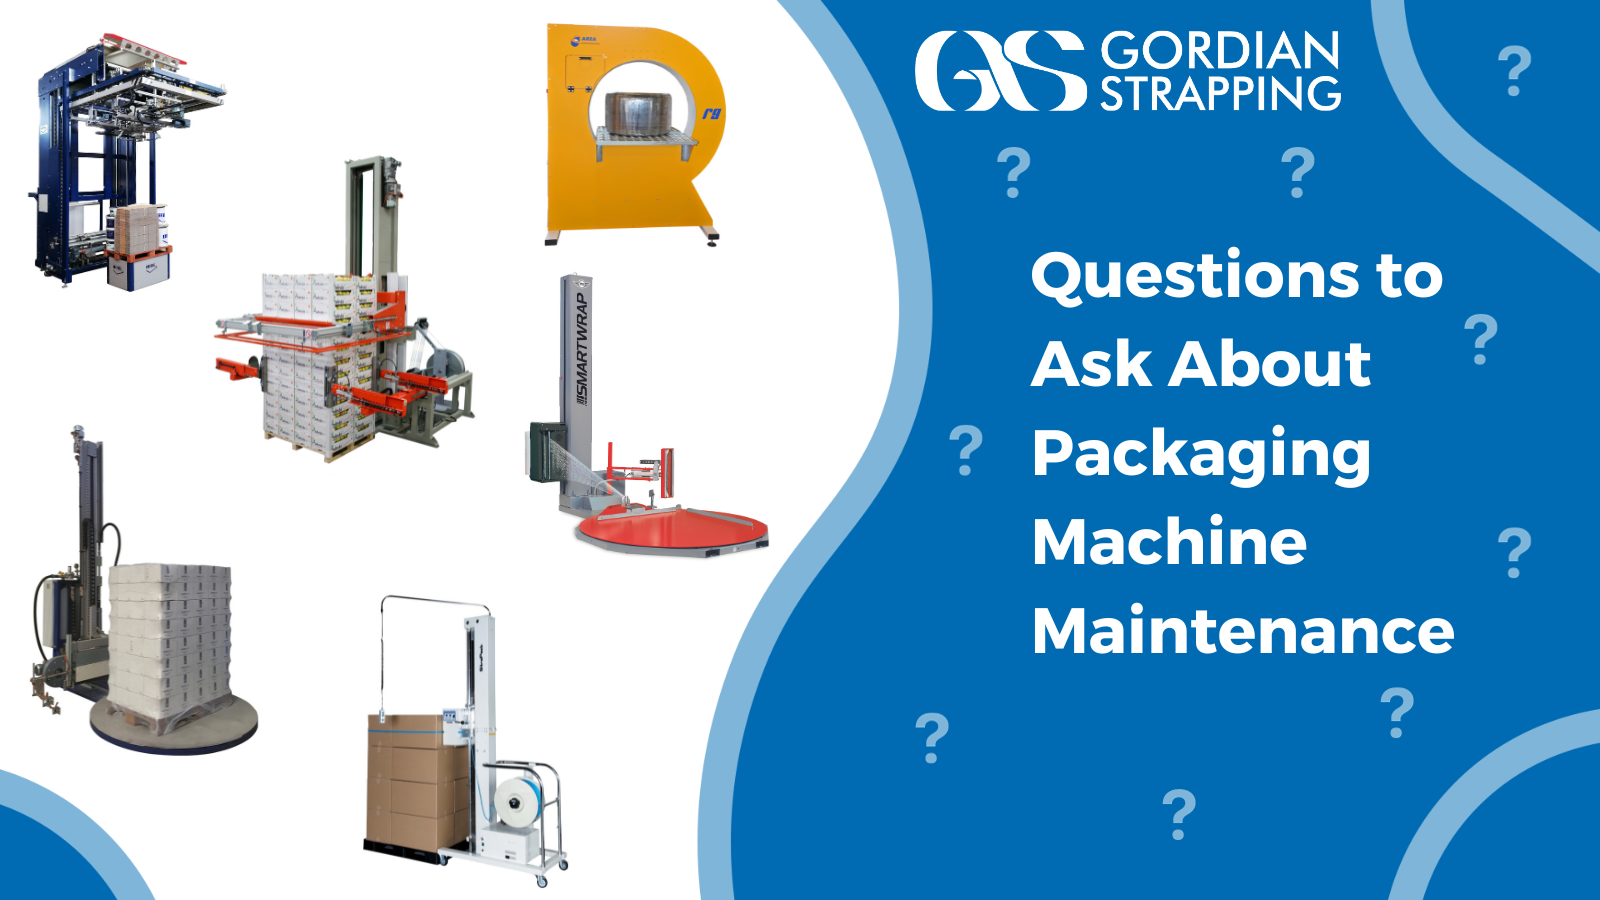 Questions to Ask About Packaging Machine Maintenance